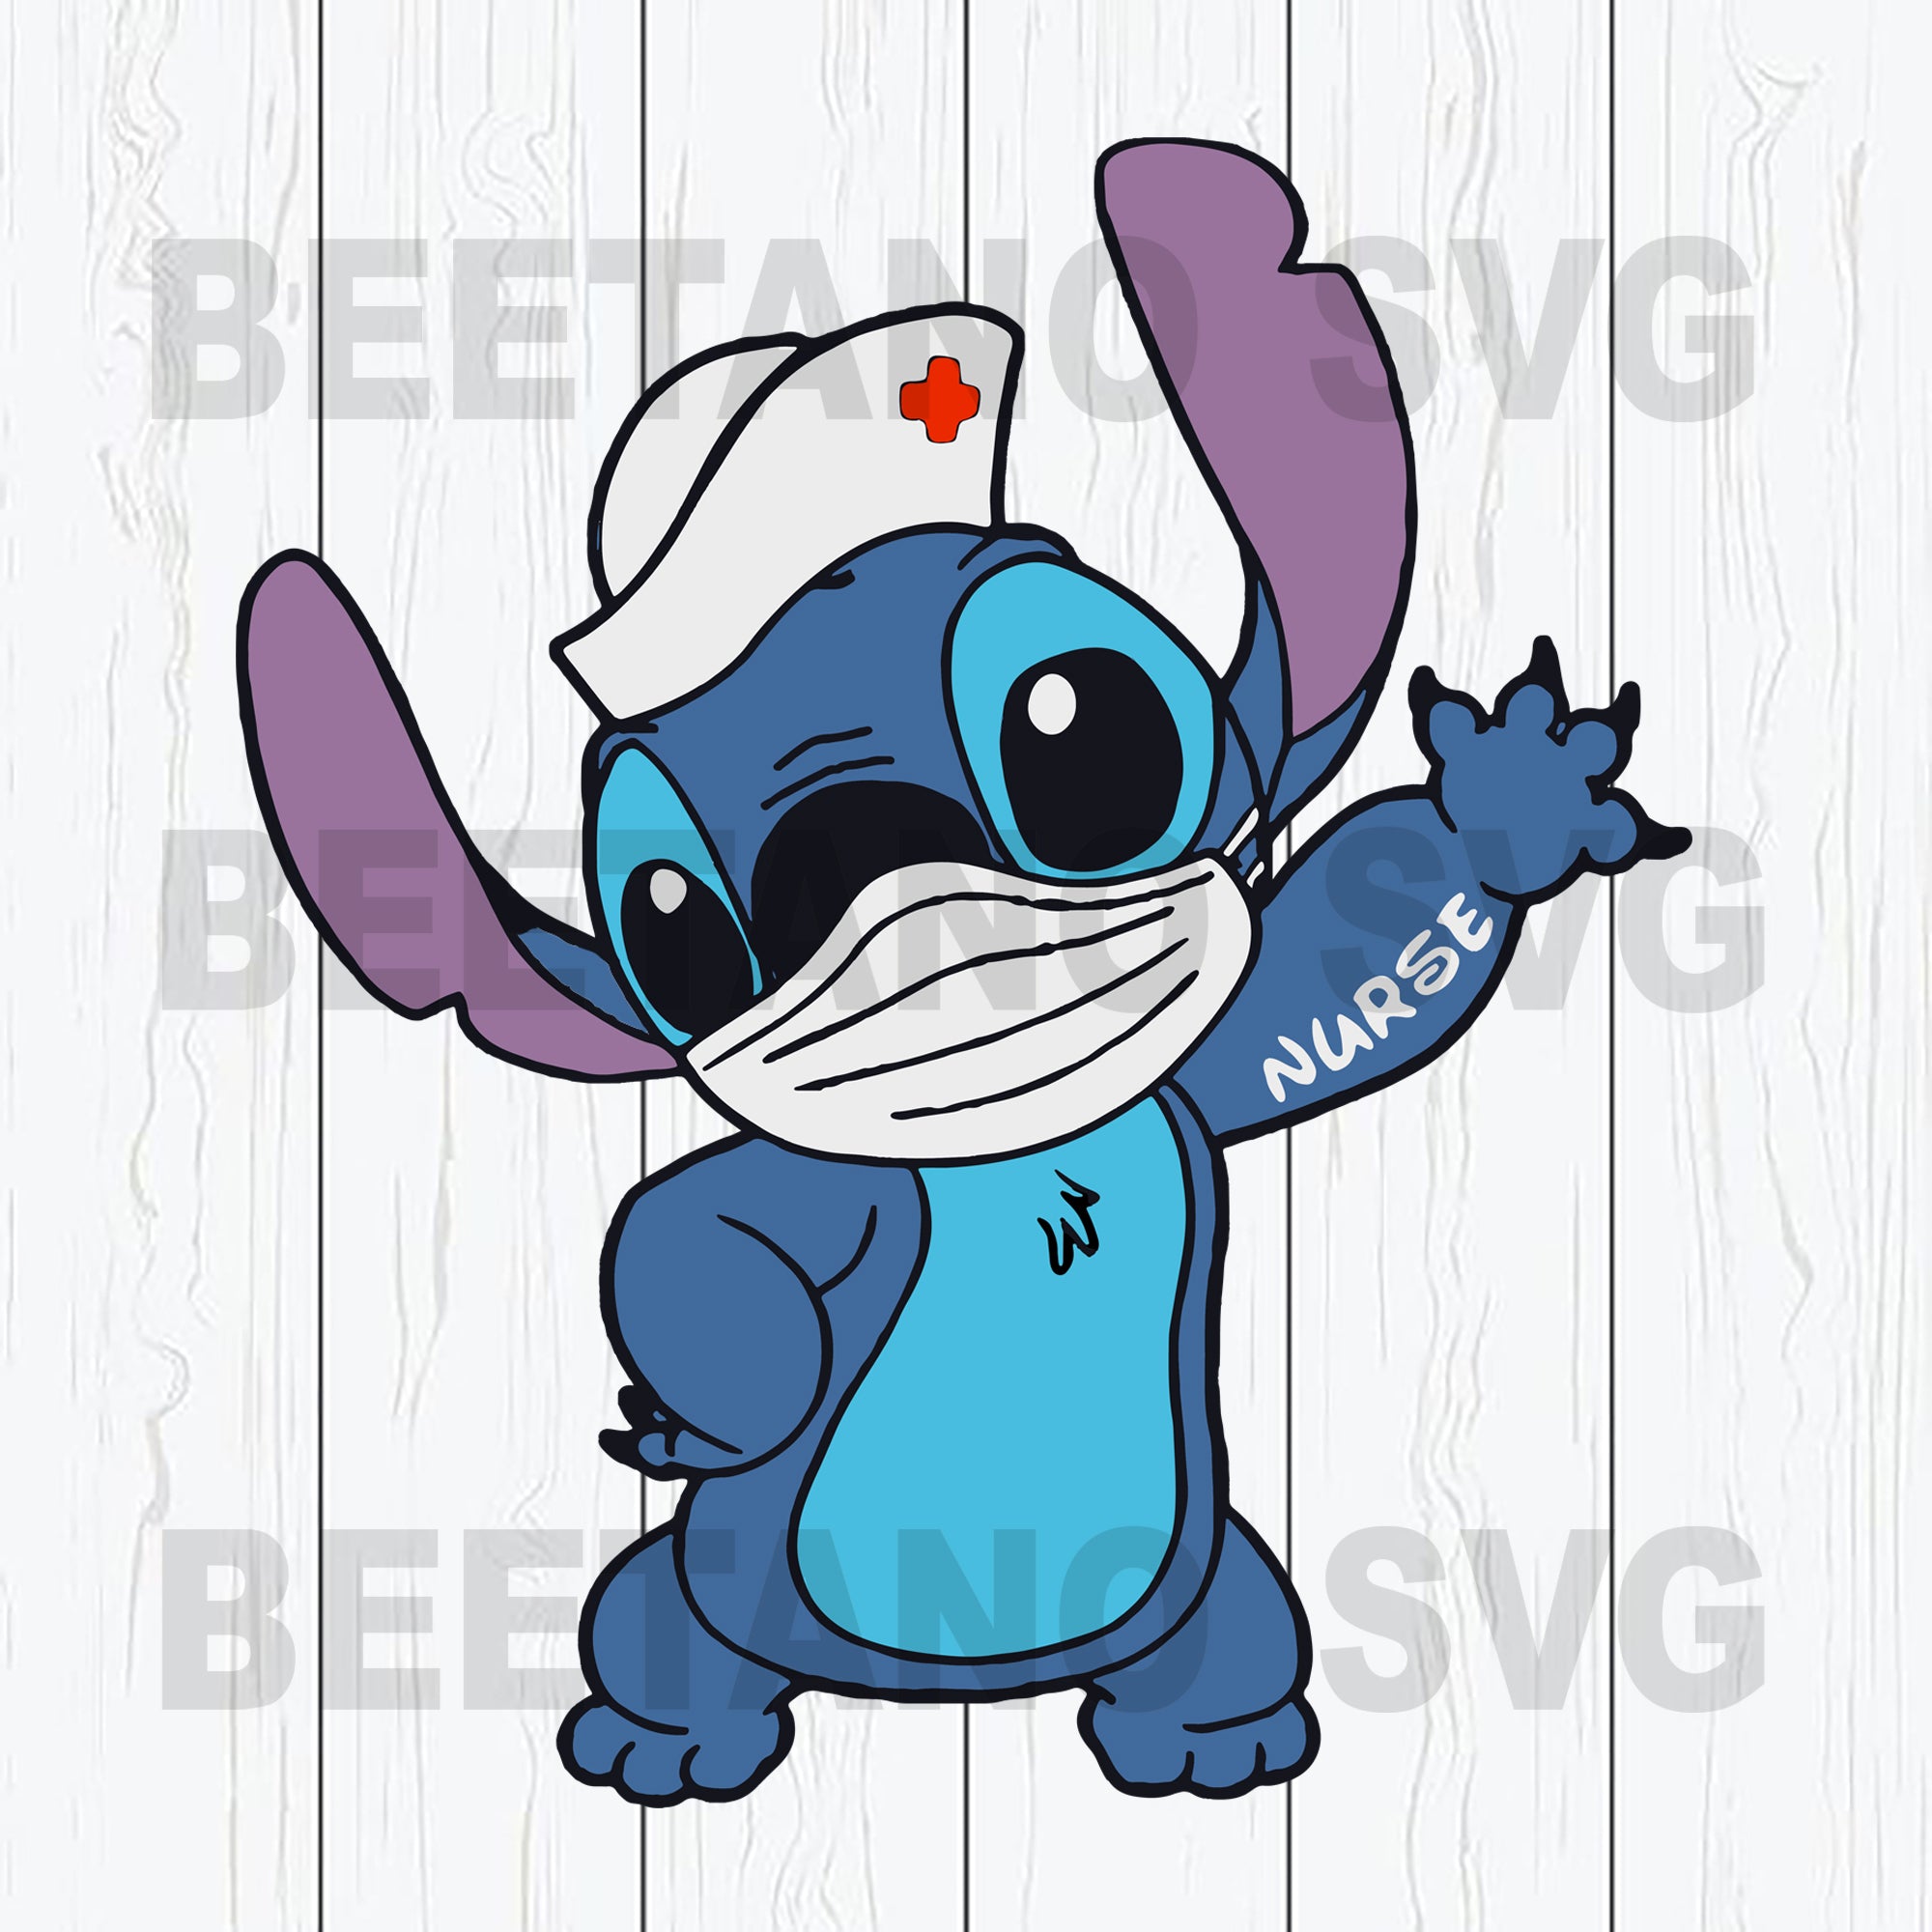 Download Lilo And Stitch Nurse Wear Face Mask Svg Files Lilo And Stitch Nurse Beetanosvg Scalable Vector Graphics